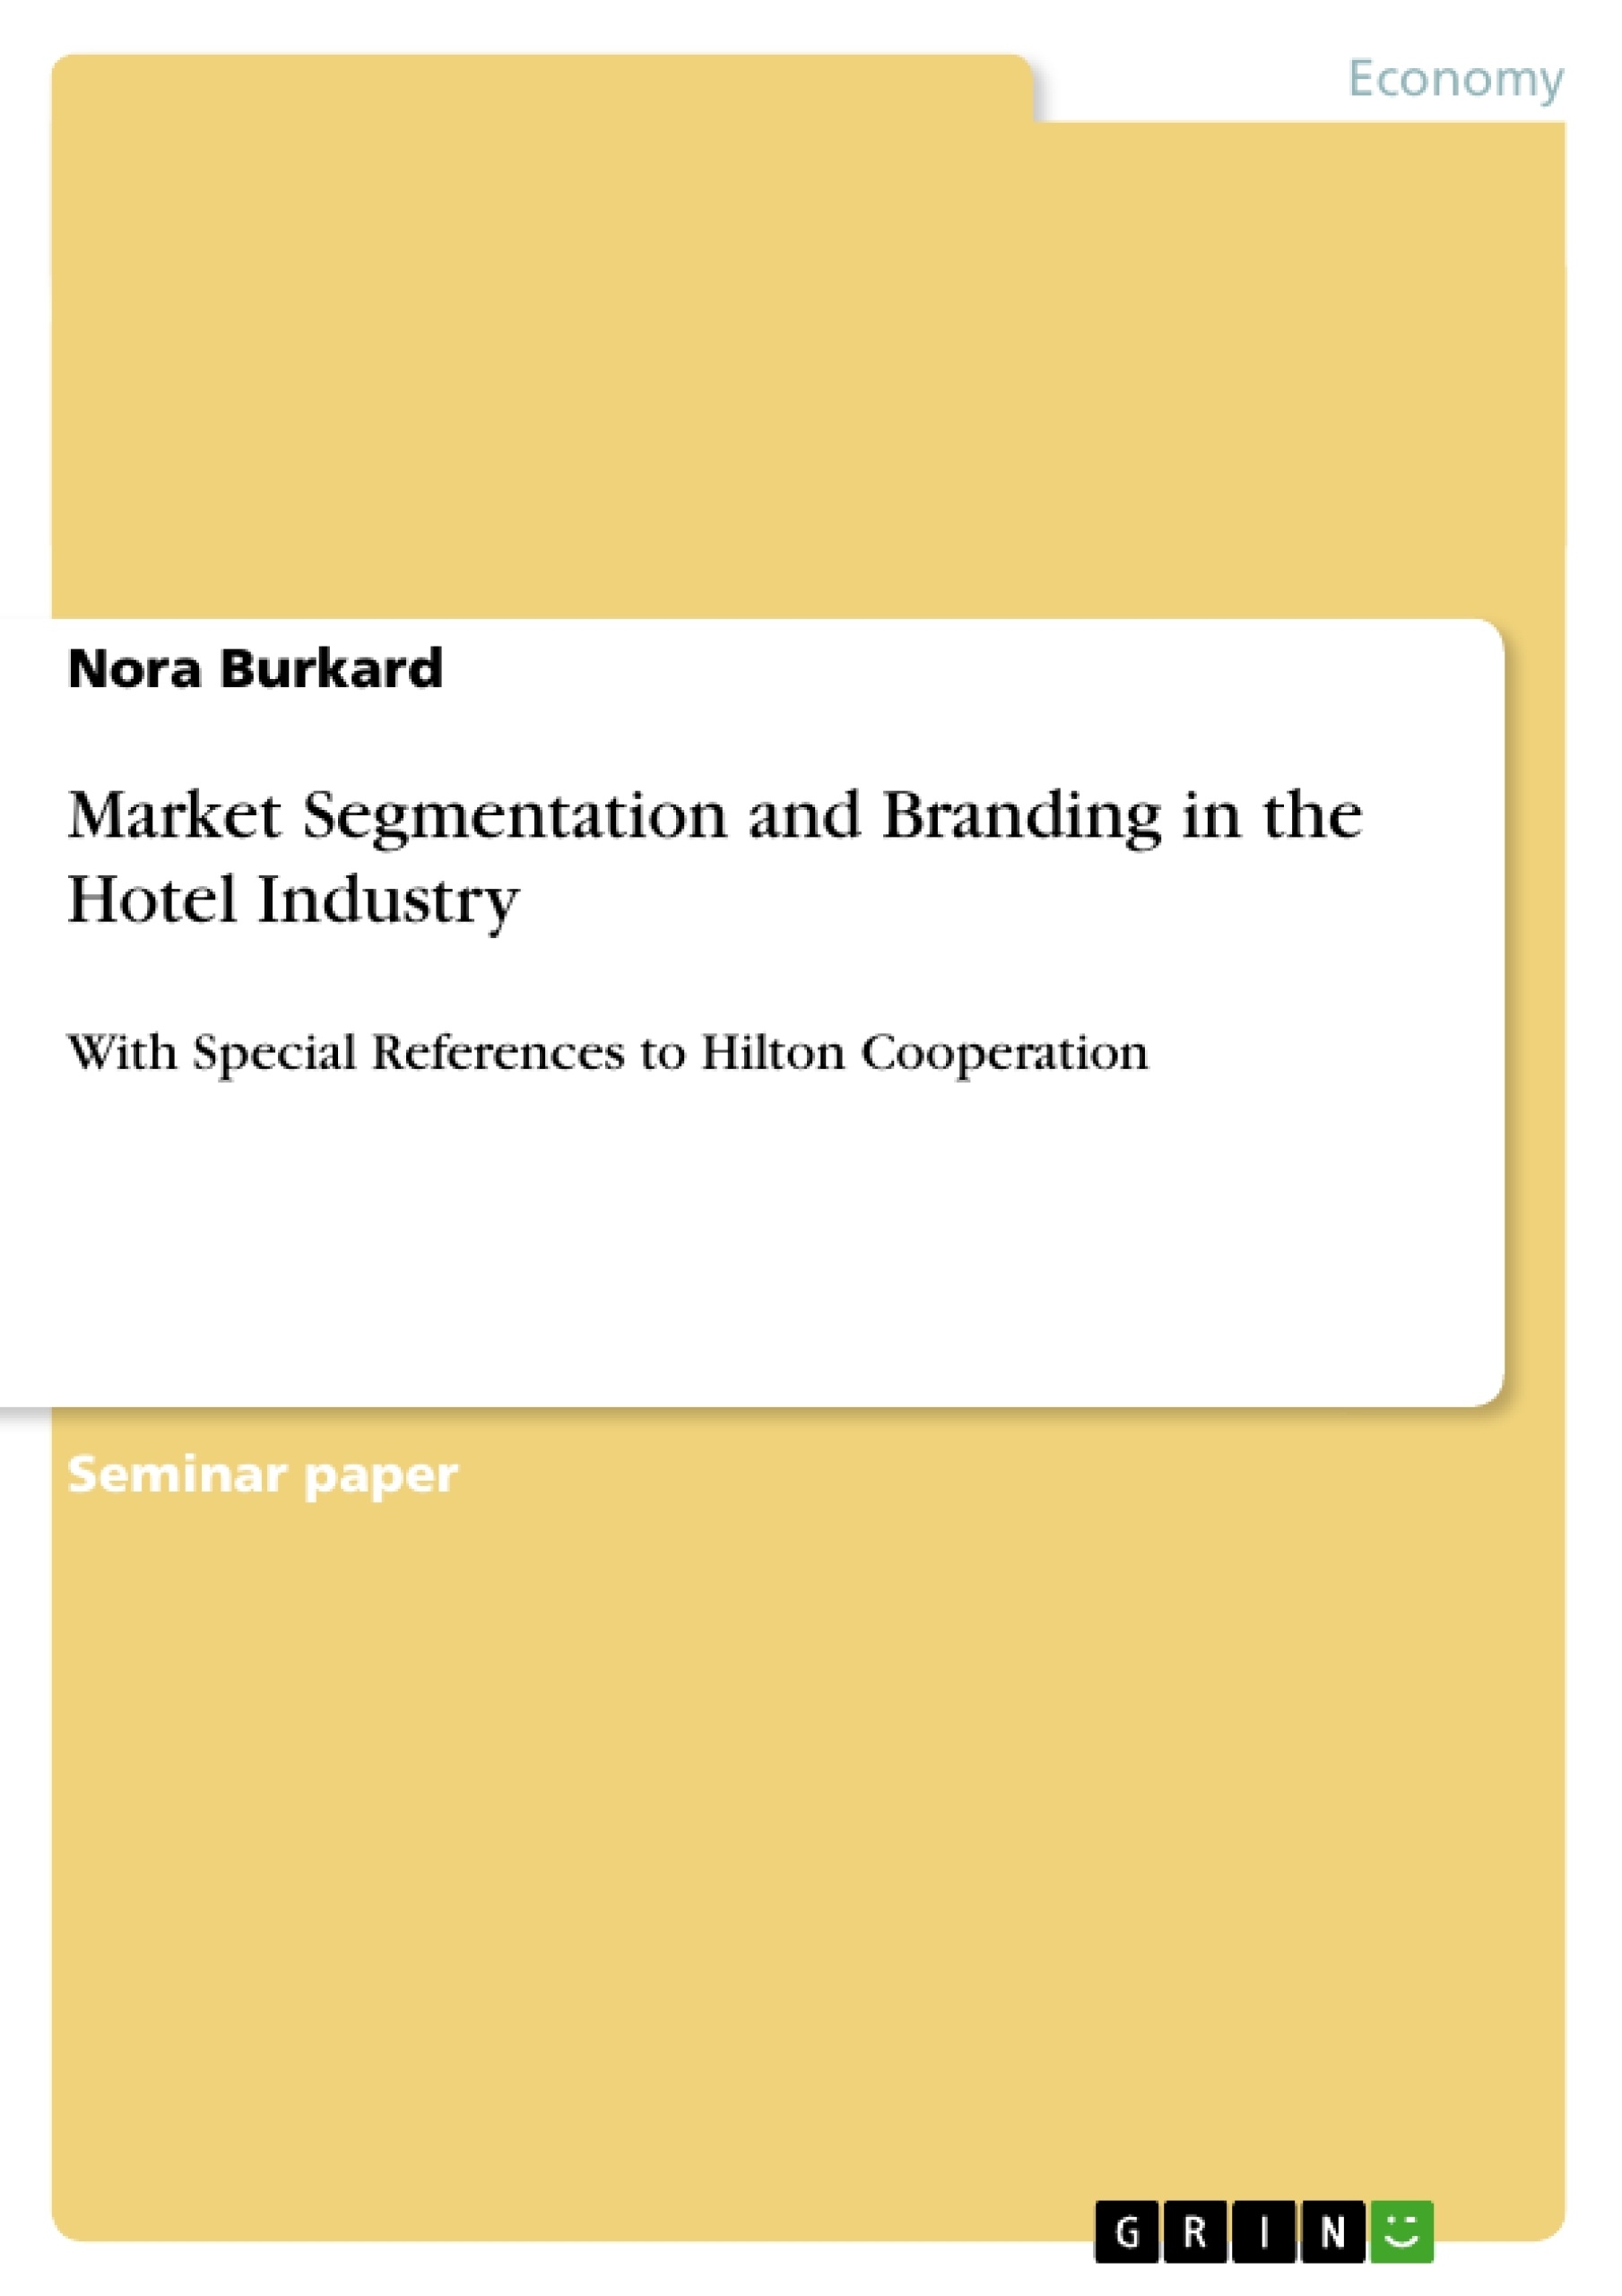 Title: Market Segmentation and Branding in the Hotel Industry